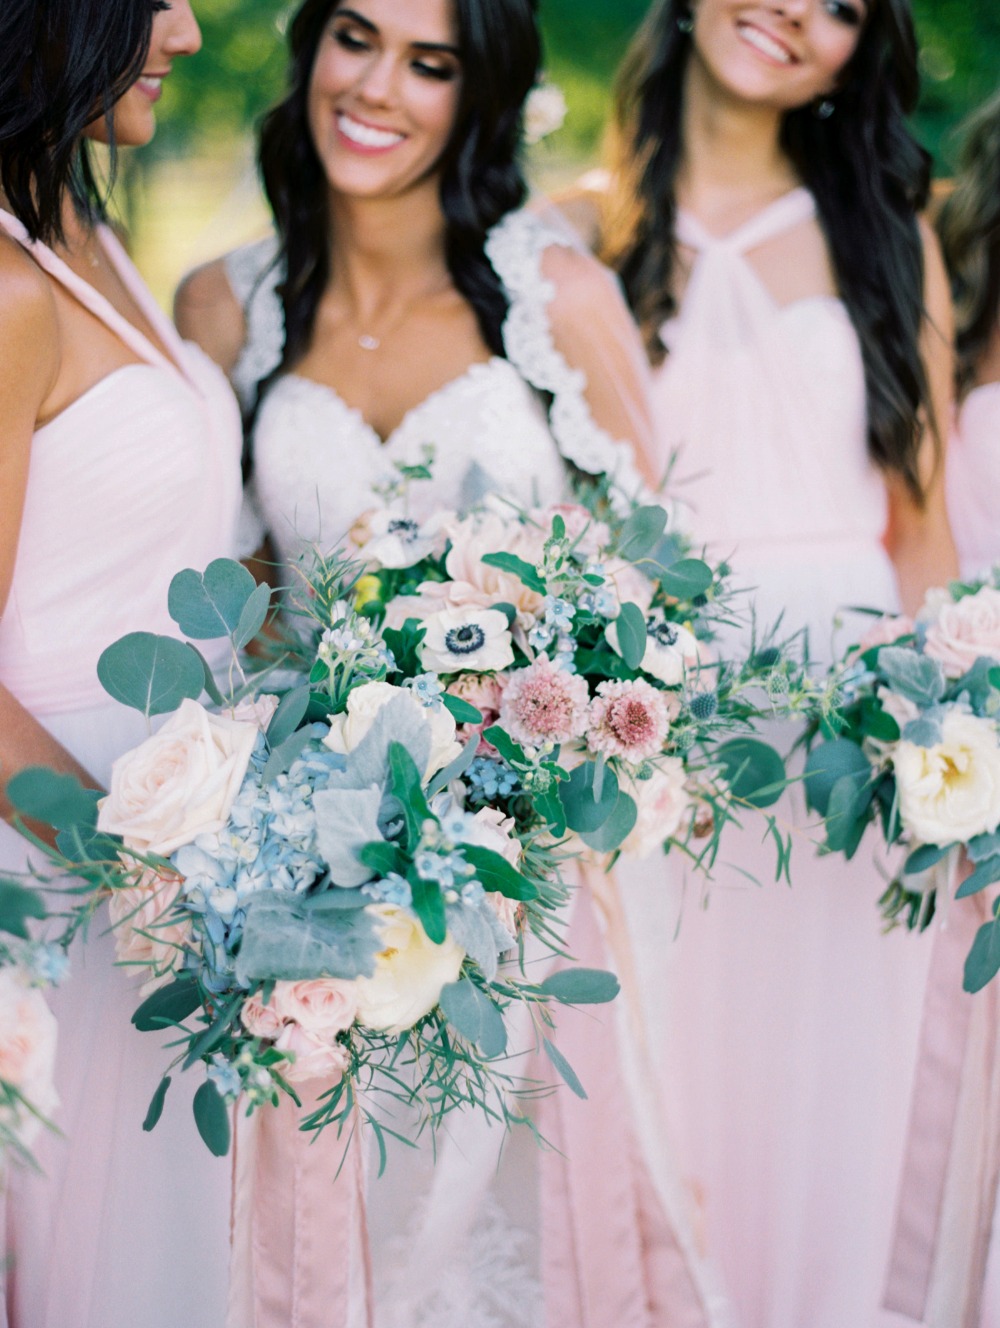 Wedding bouquets for the bride and bridesmaids